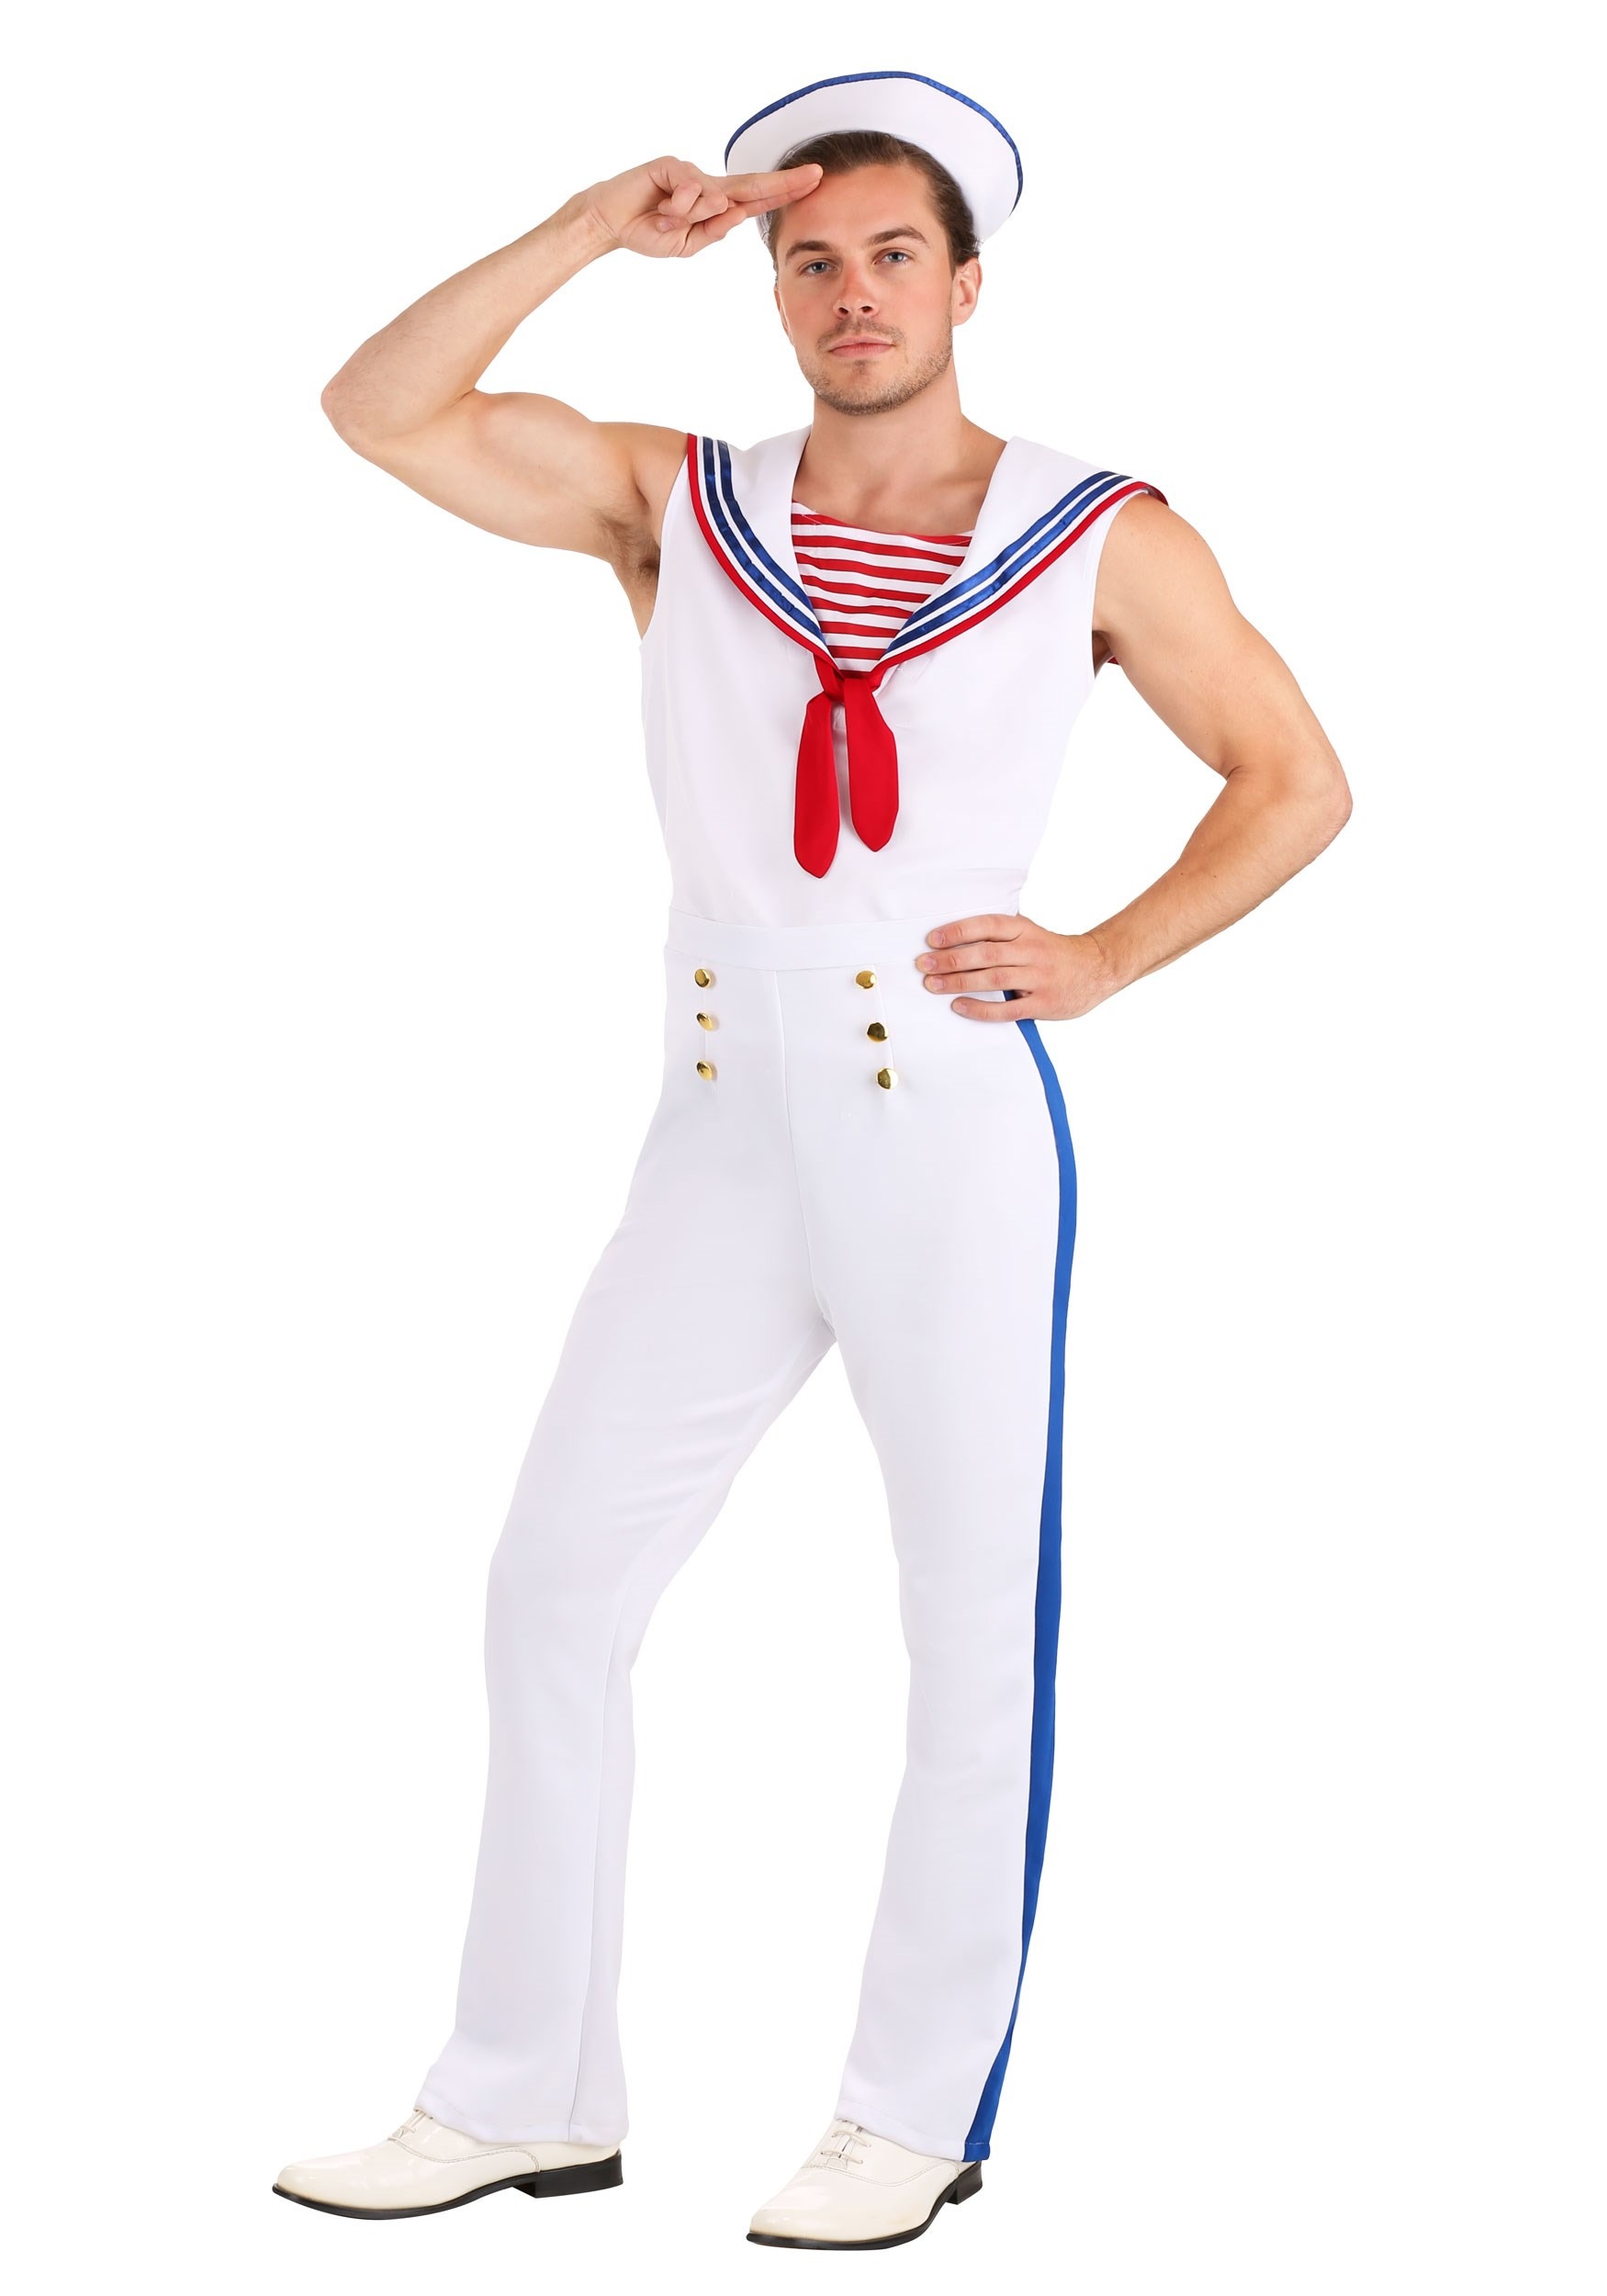 Photos - Fancy Dress FUN Costumes Exclusive Men's First-class White Sailor Costume Red/Blue